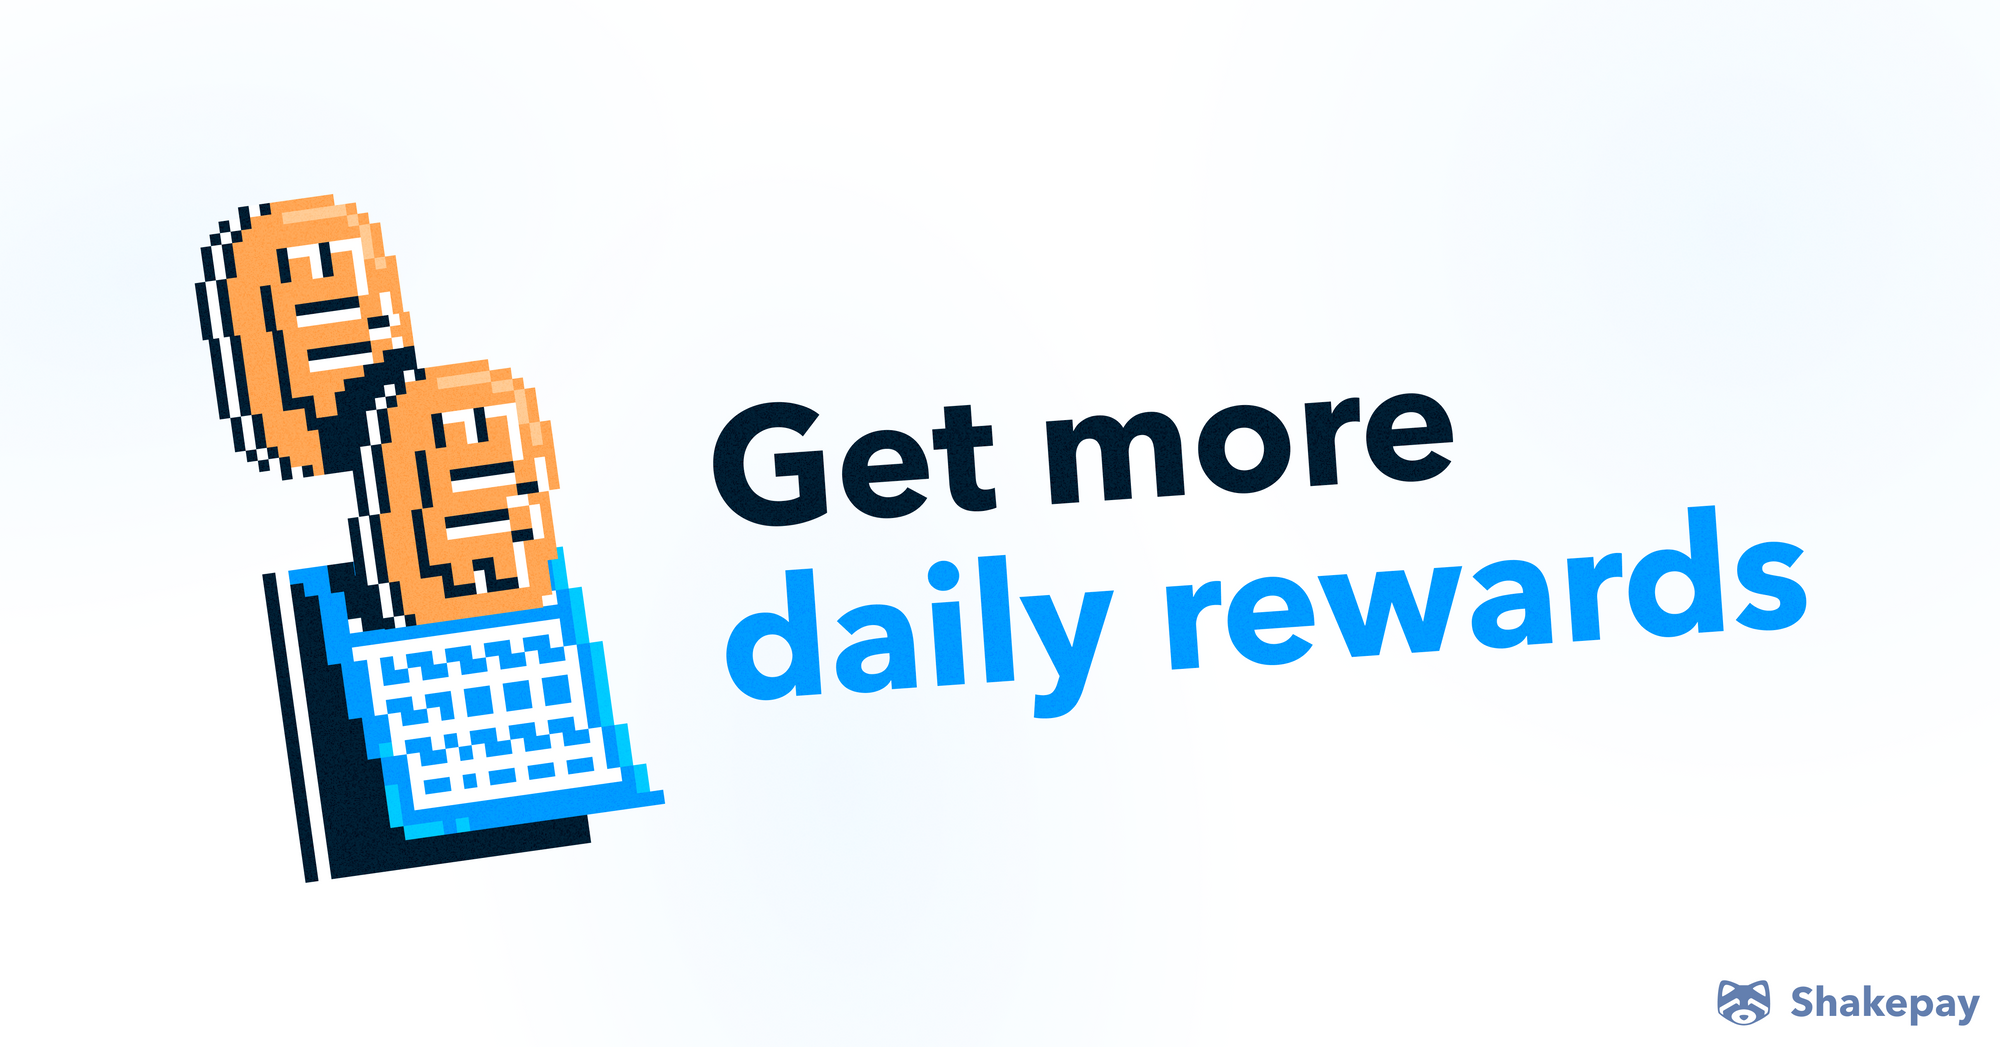 Introducing: The Daily Referral Giveaway!